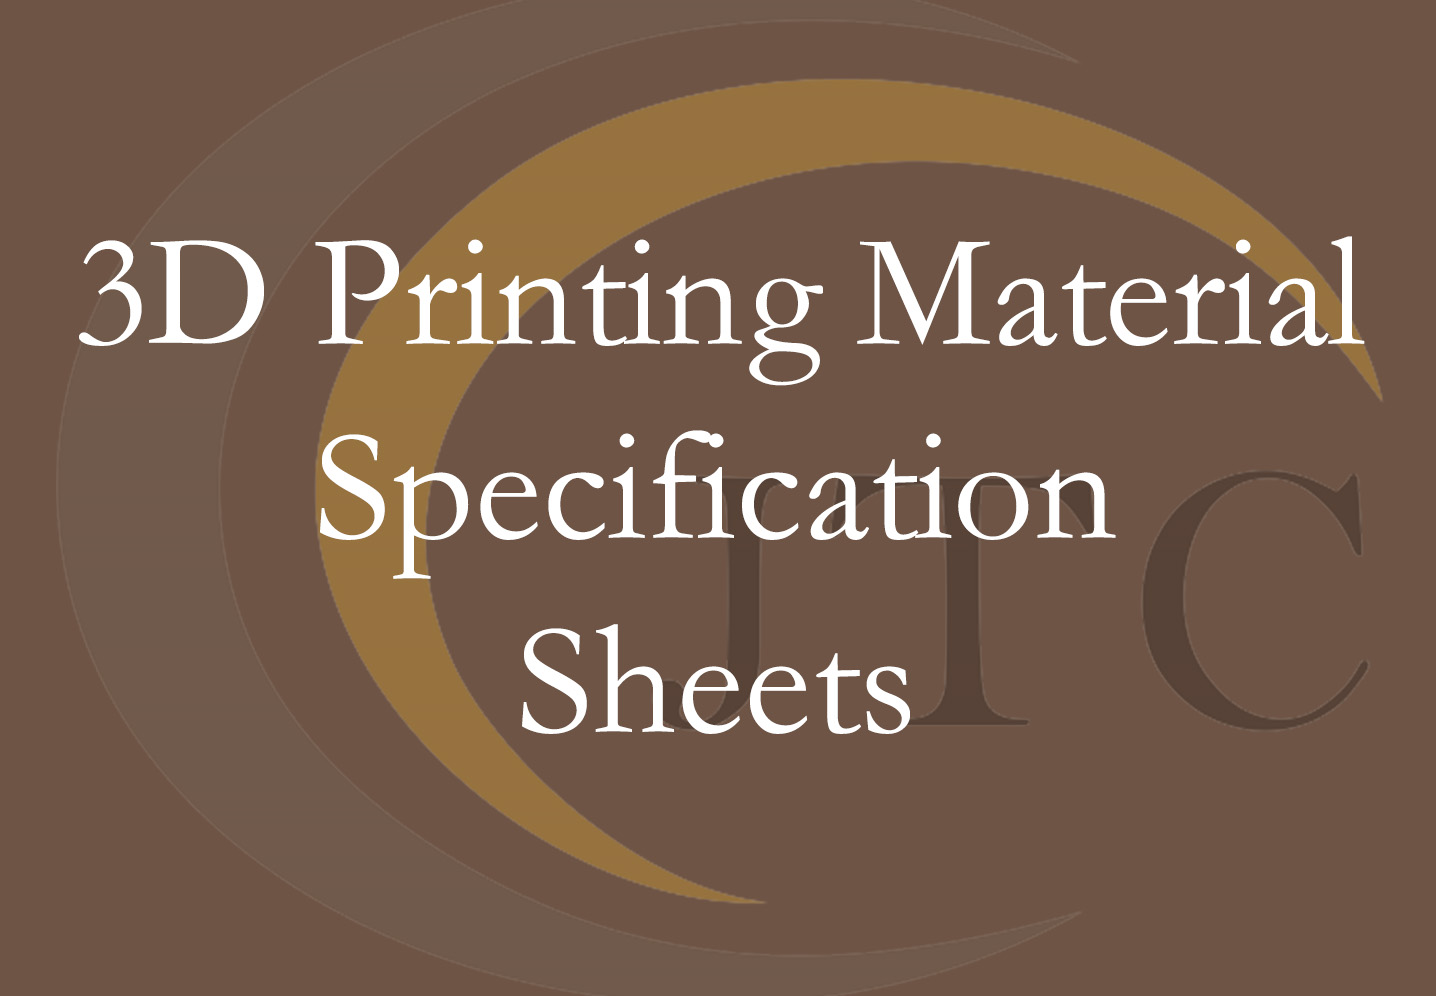 3D Printing Materials Specification Sheets Design Guide